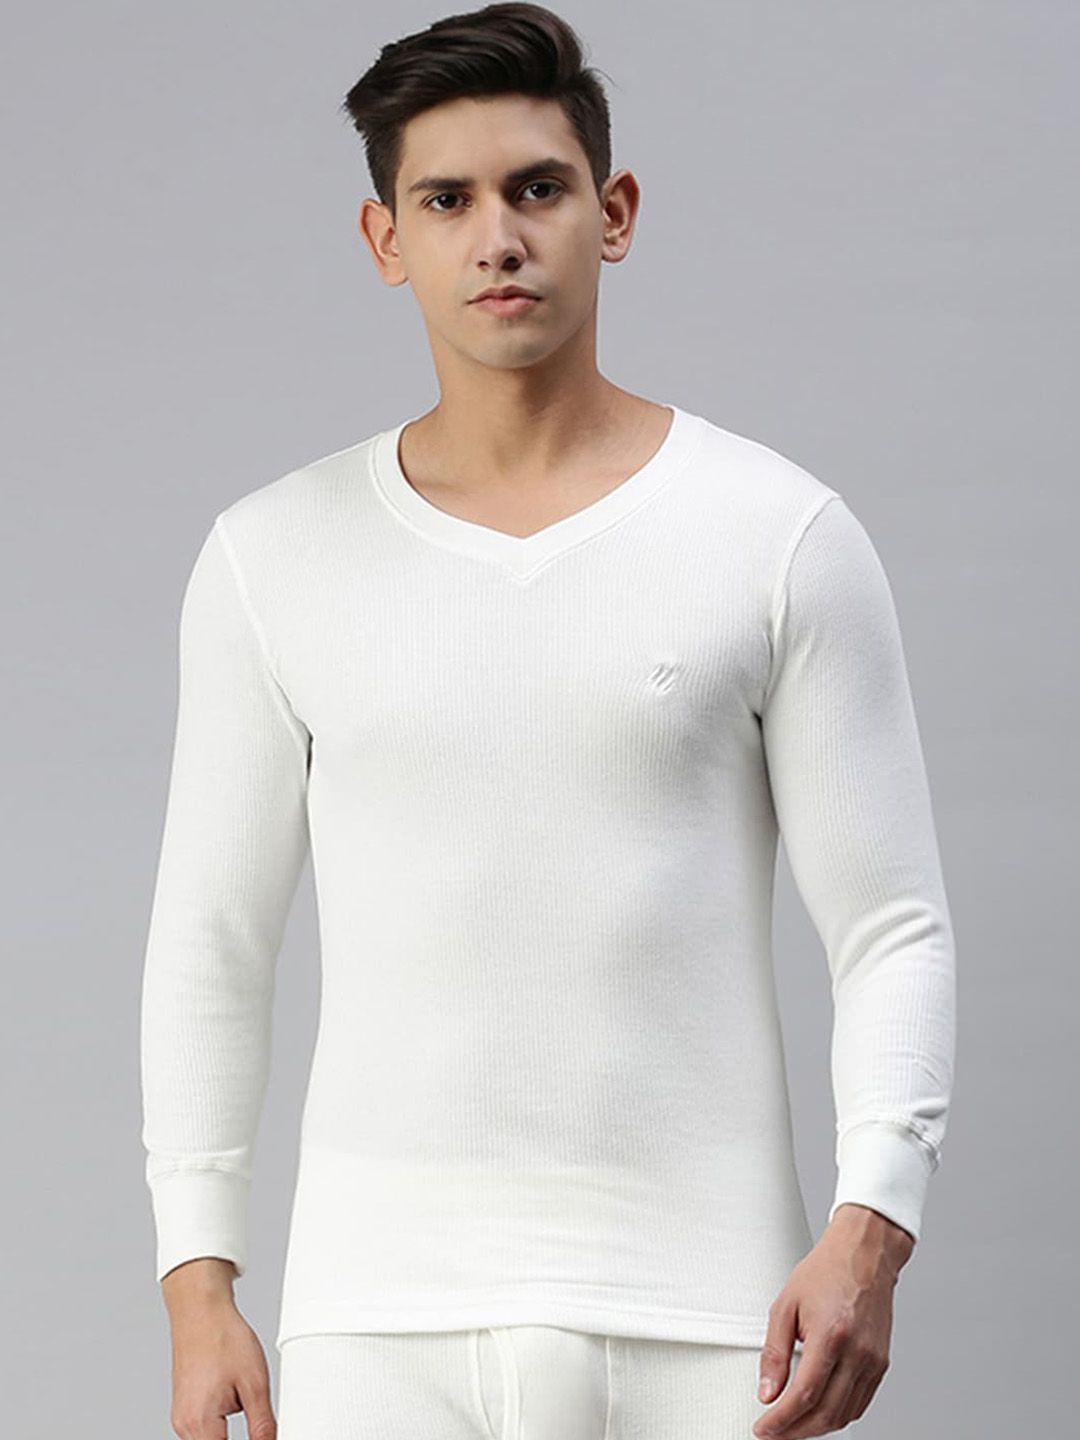 onn cotton long sleeve thermal tops